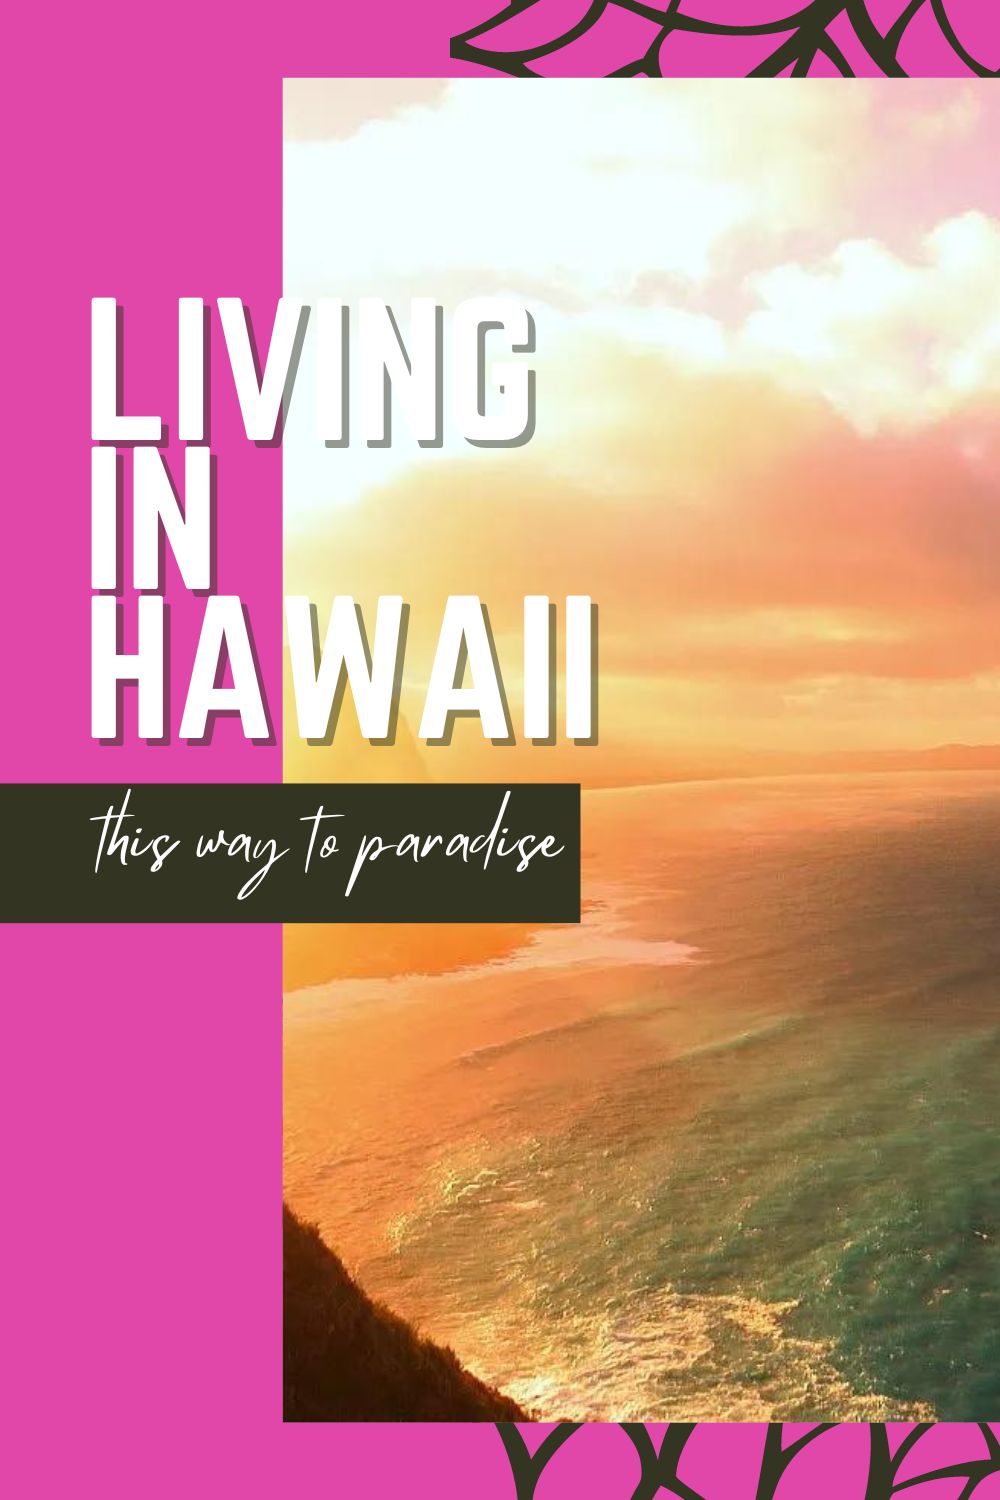 What I Learned by Living In Hawaii